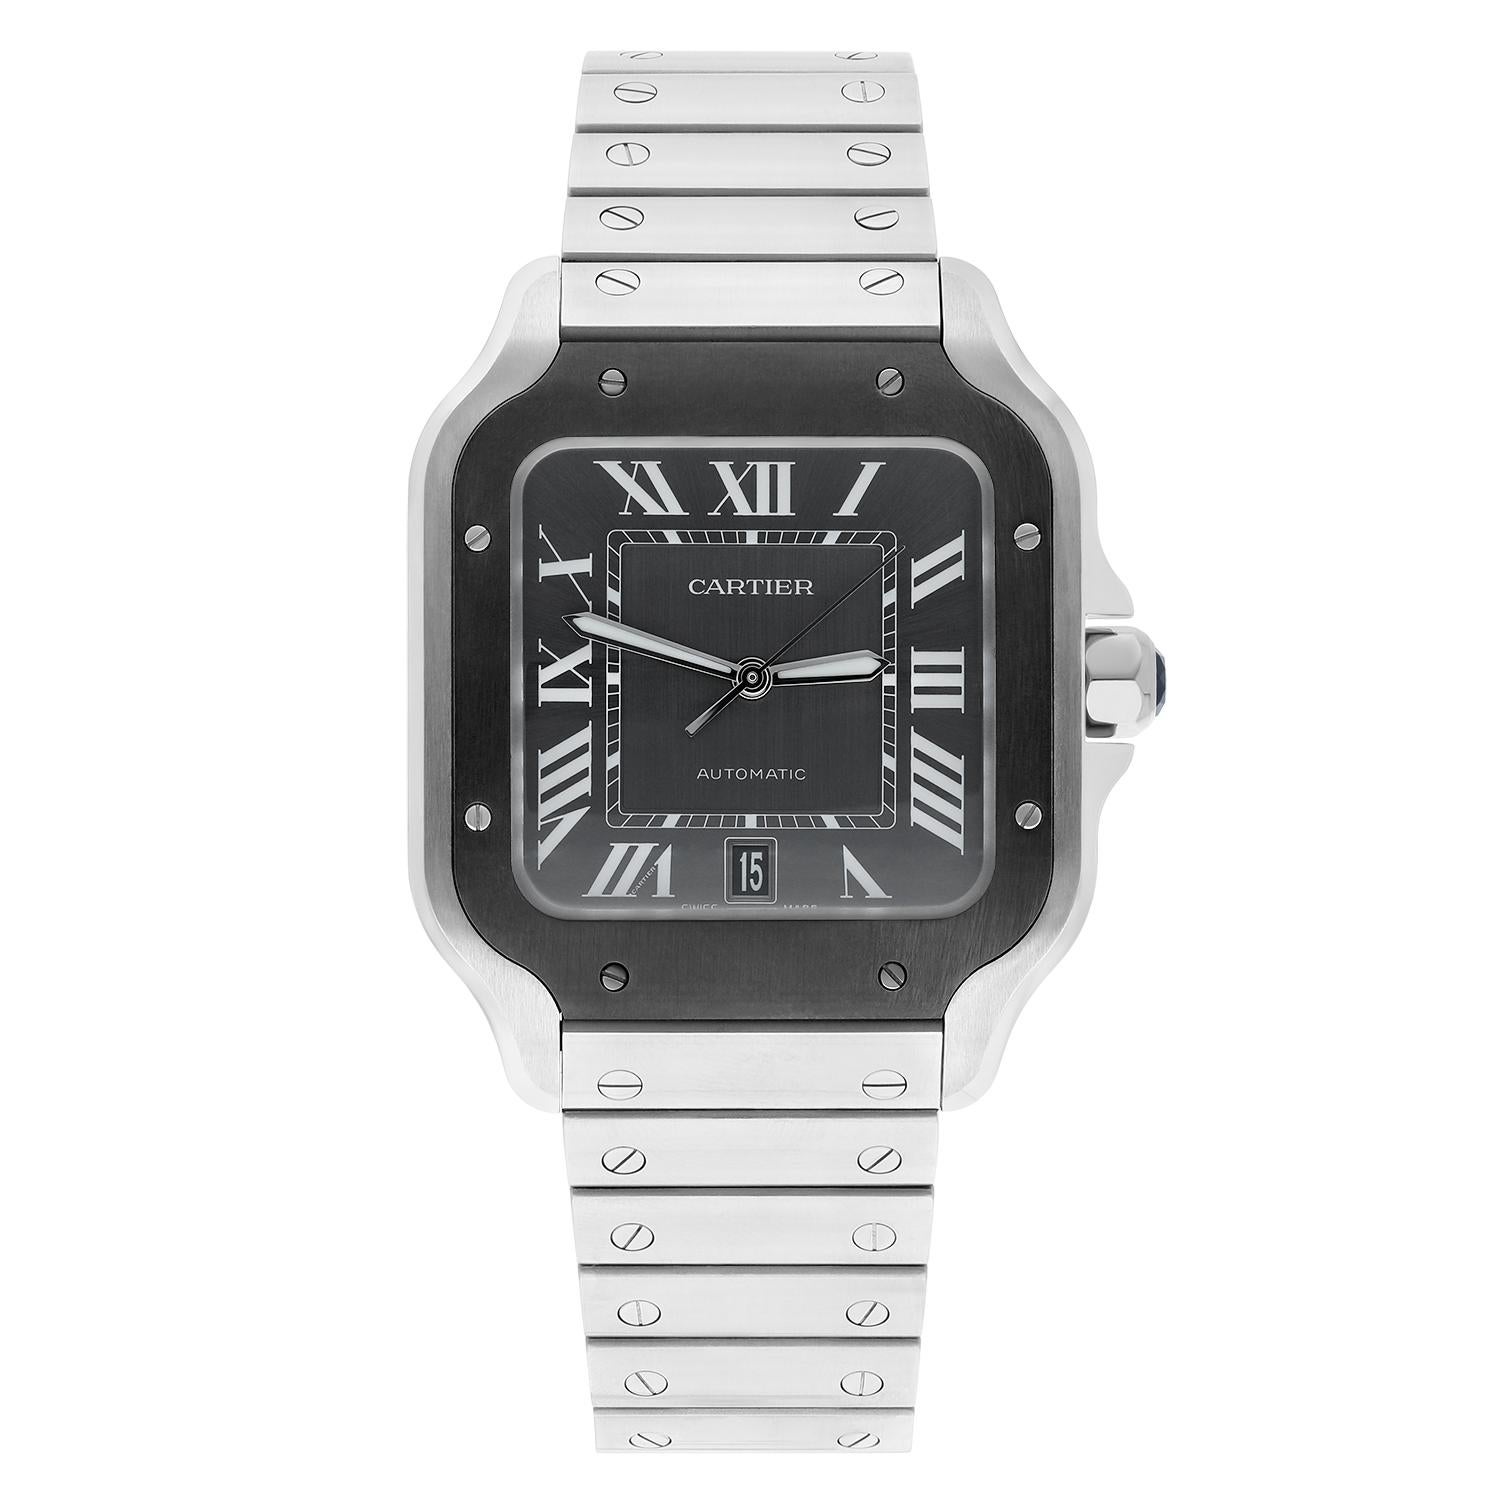 This Cartier Santos de Cartier wristwatch is a timeless piece that exudes class and luxury. The silver stainless steel case, black adlc bezel surrounding a gray dial on a stainless steel bracelet with folding buckle. With an automatic mechanical